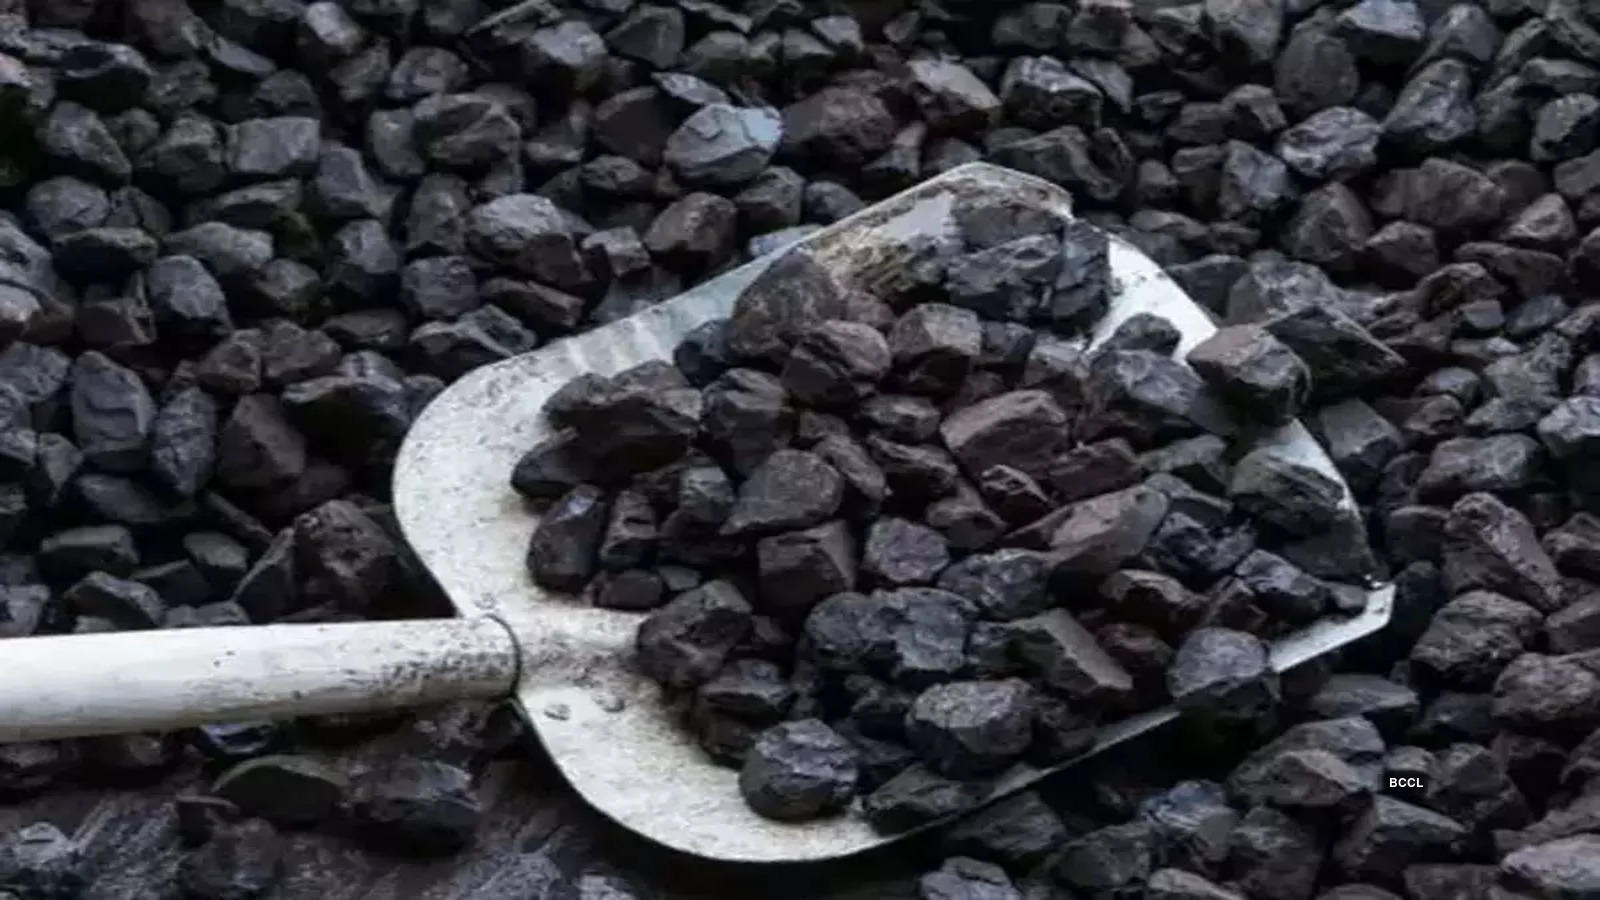 At 11.4 GW, India's coal proposals hit record high since 2016: Global Energy Monitor